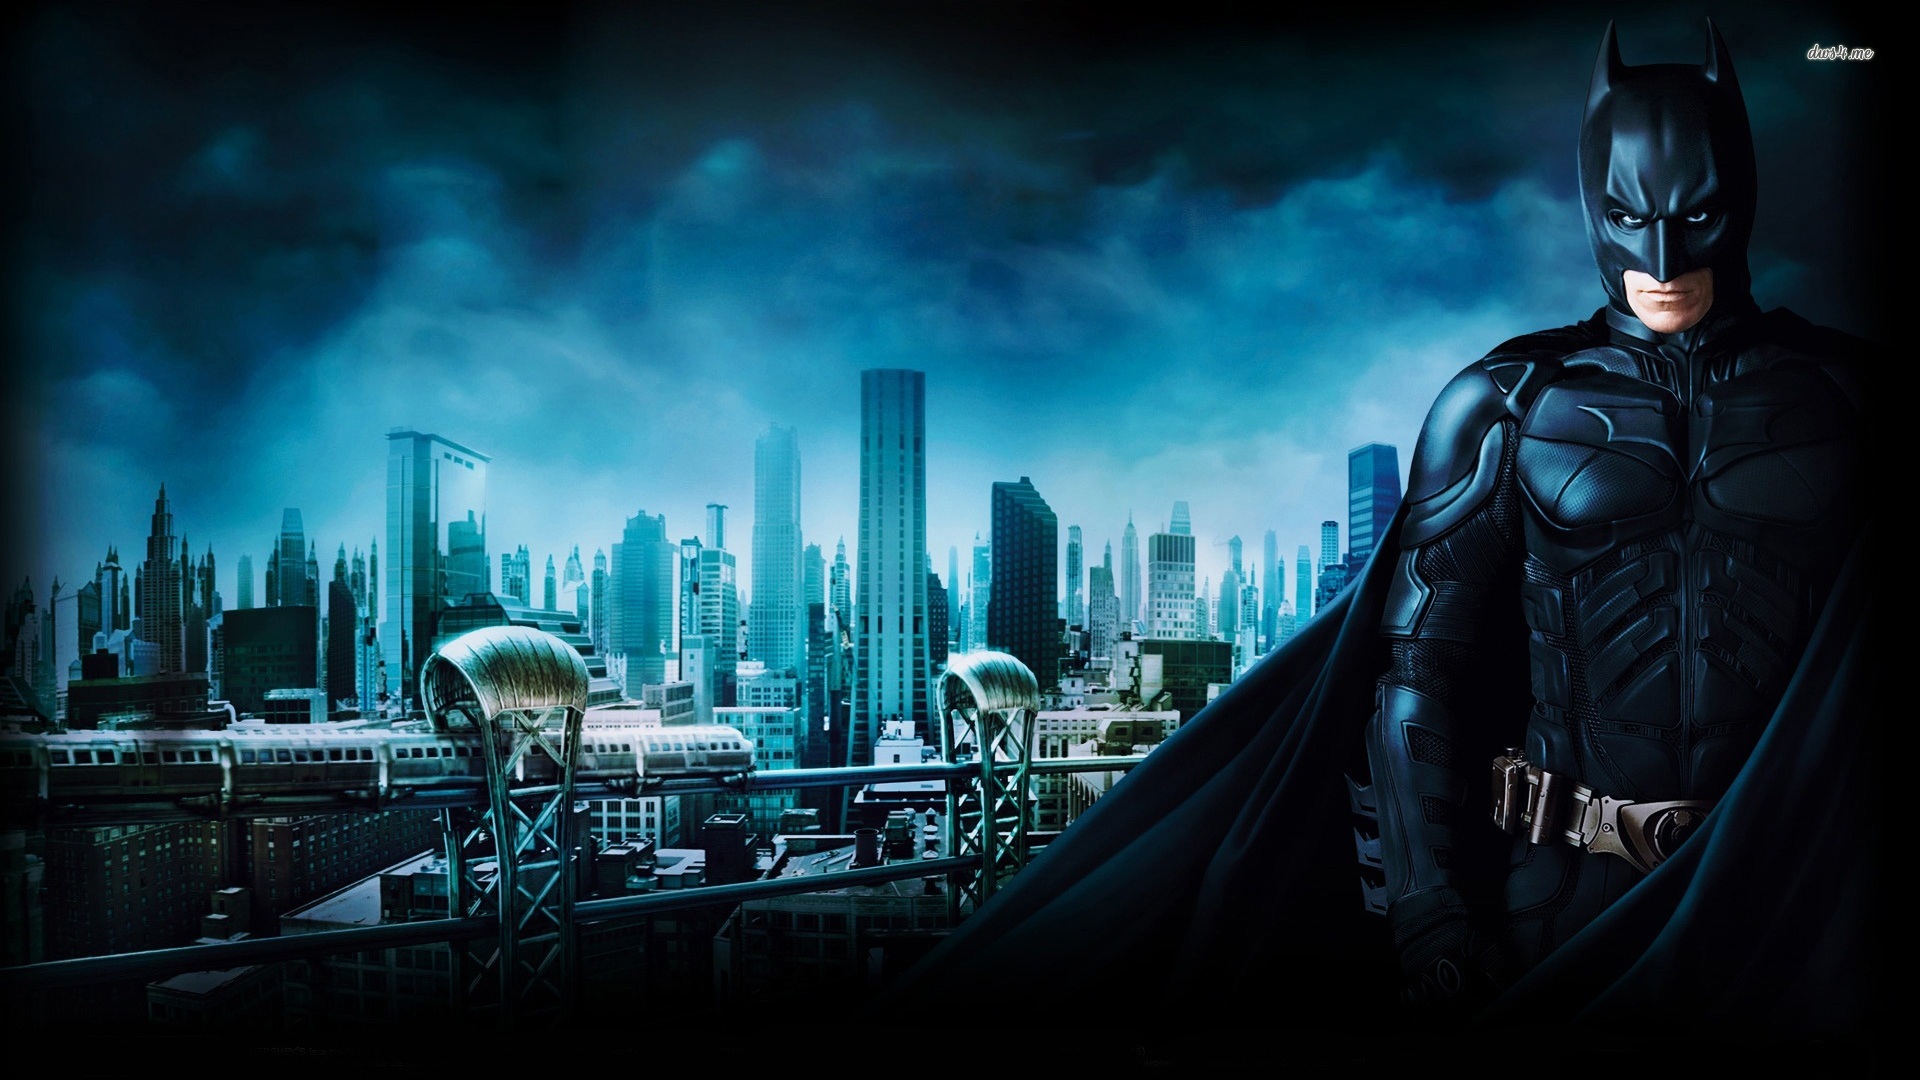 Batman The Dark Knight Wallpapers and Background Images   stmednet